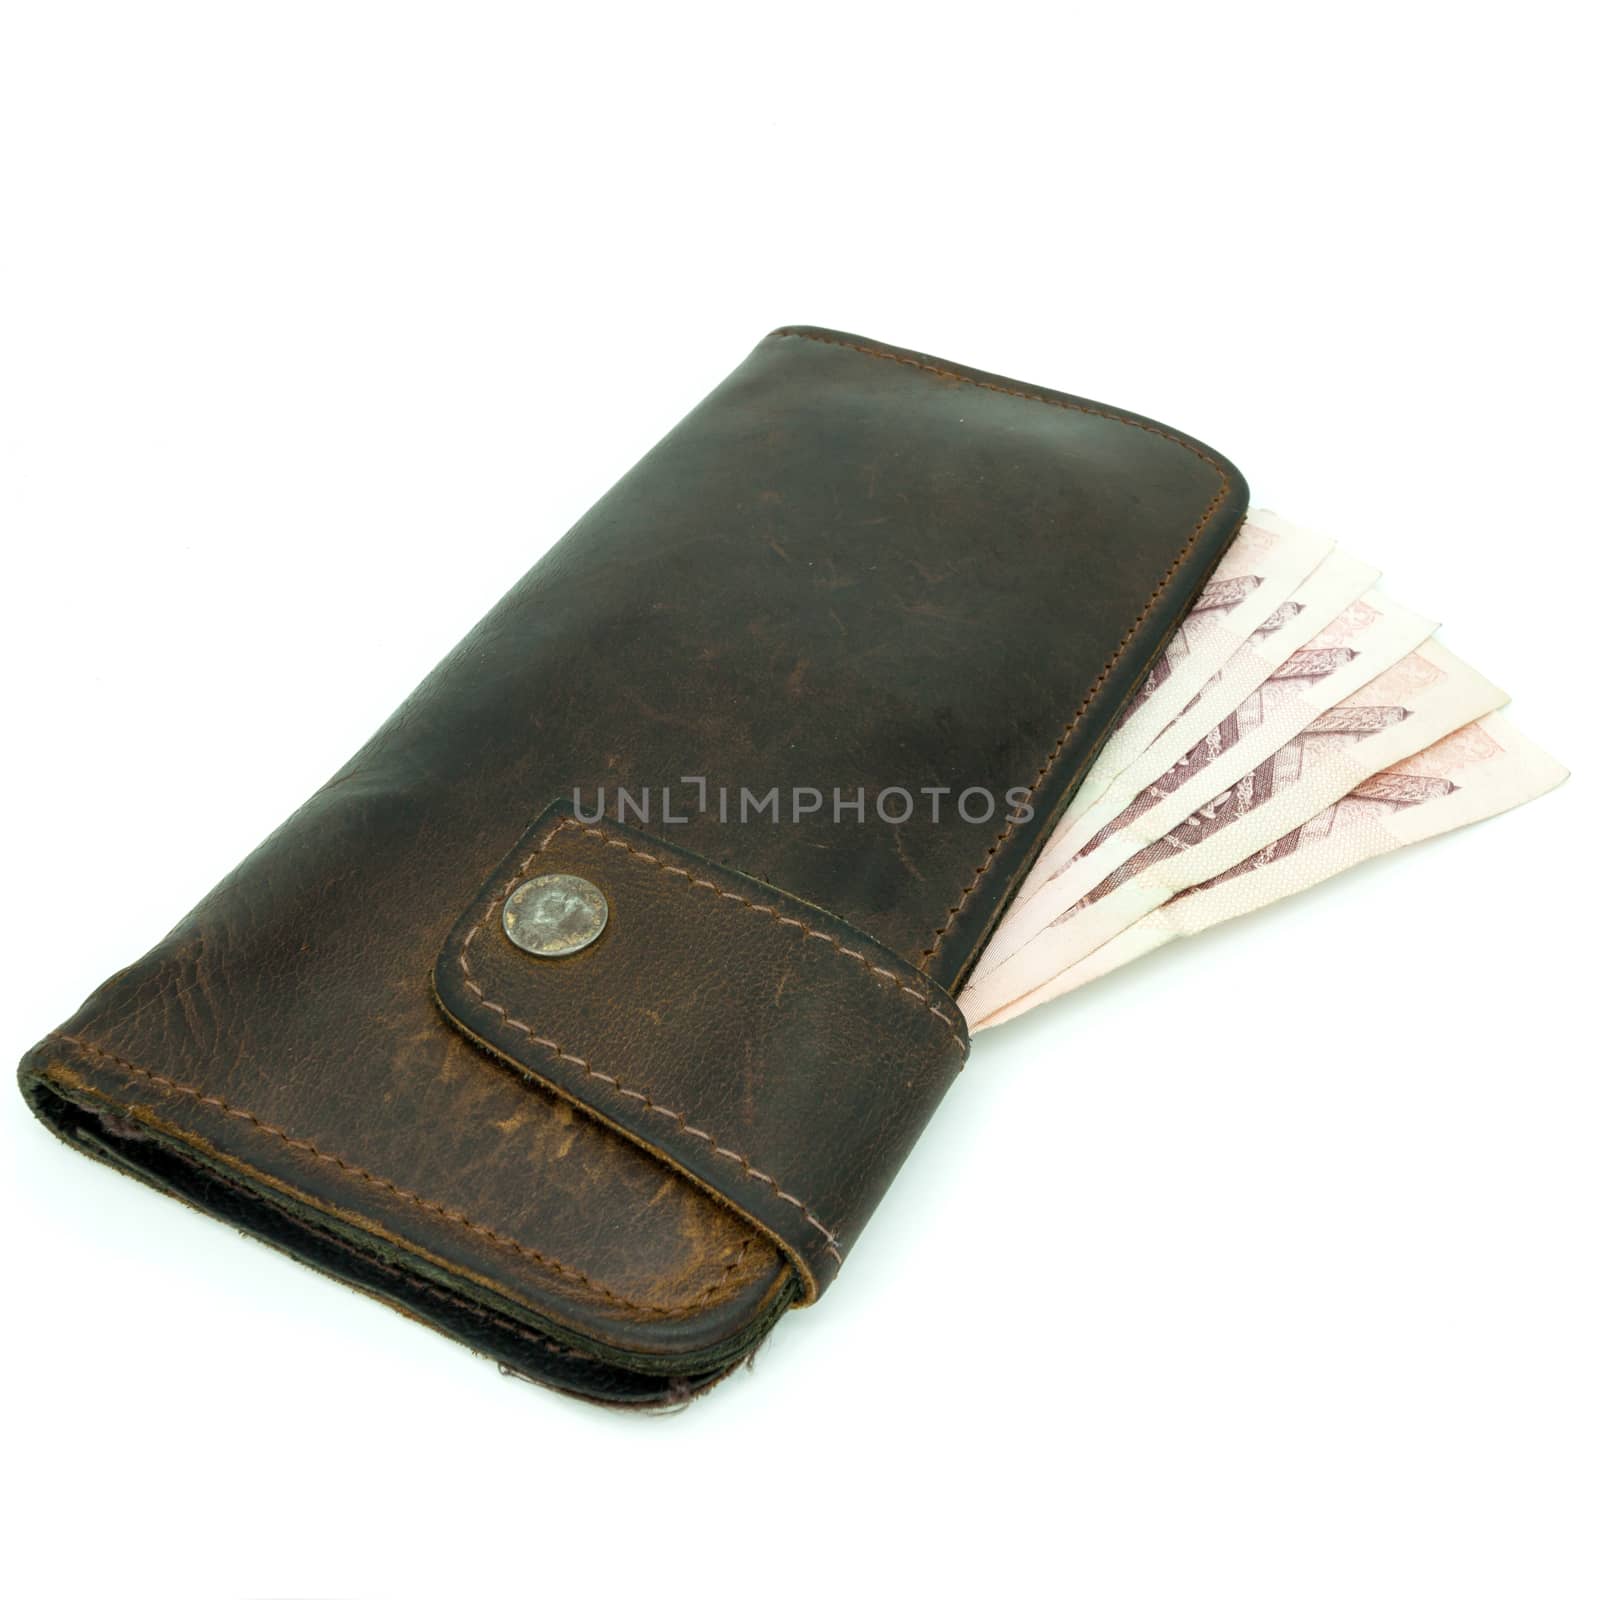 brown leather wallet with money isolated on white background